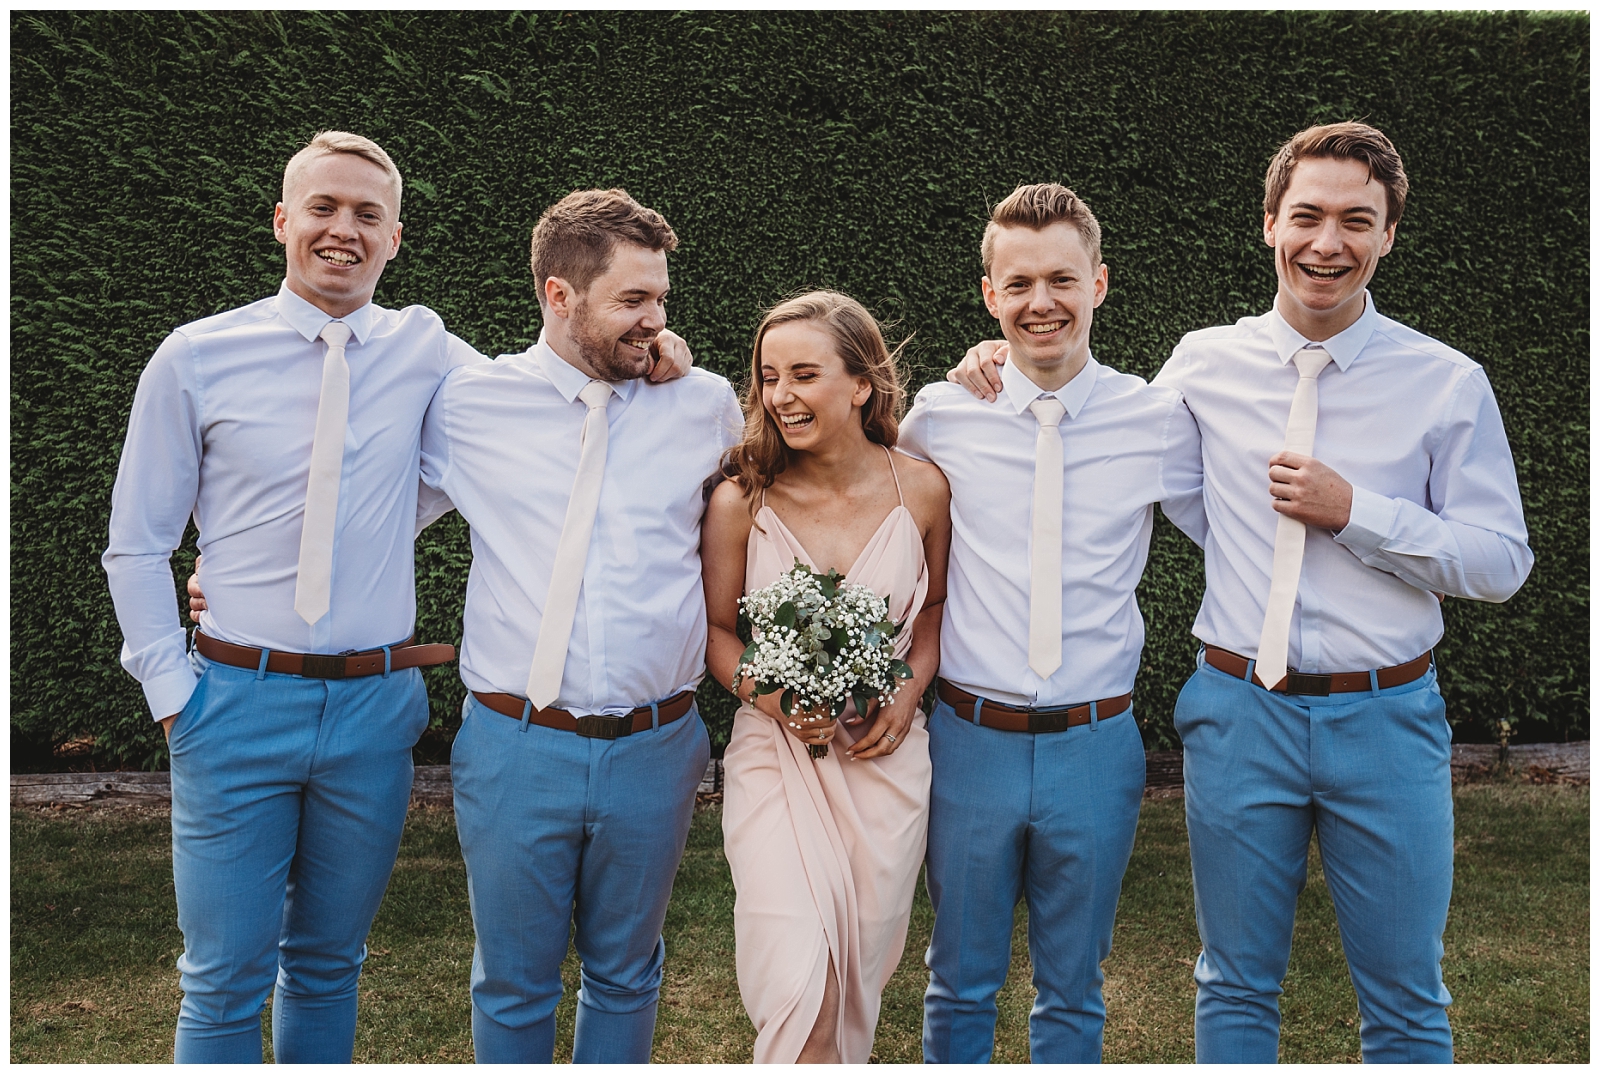 Groom stands with brothers and sister laughing.